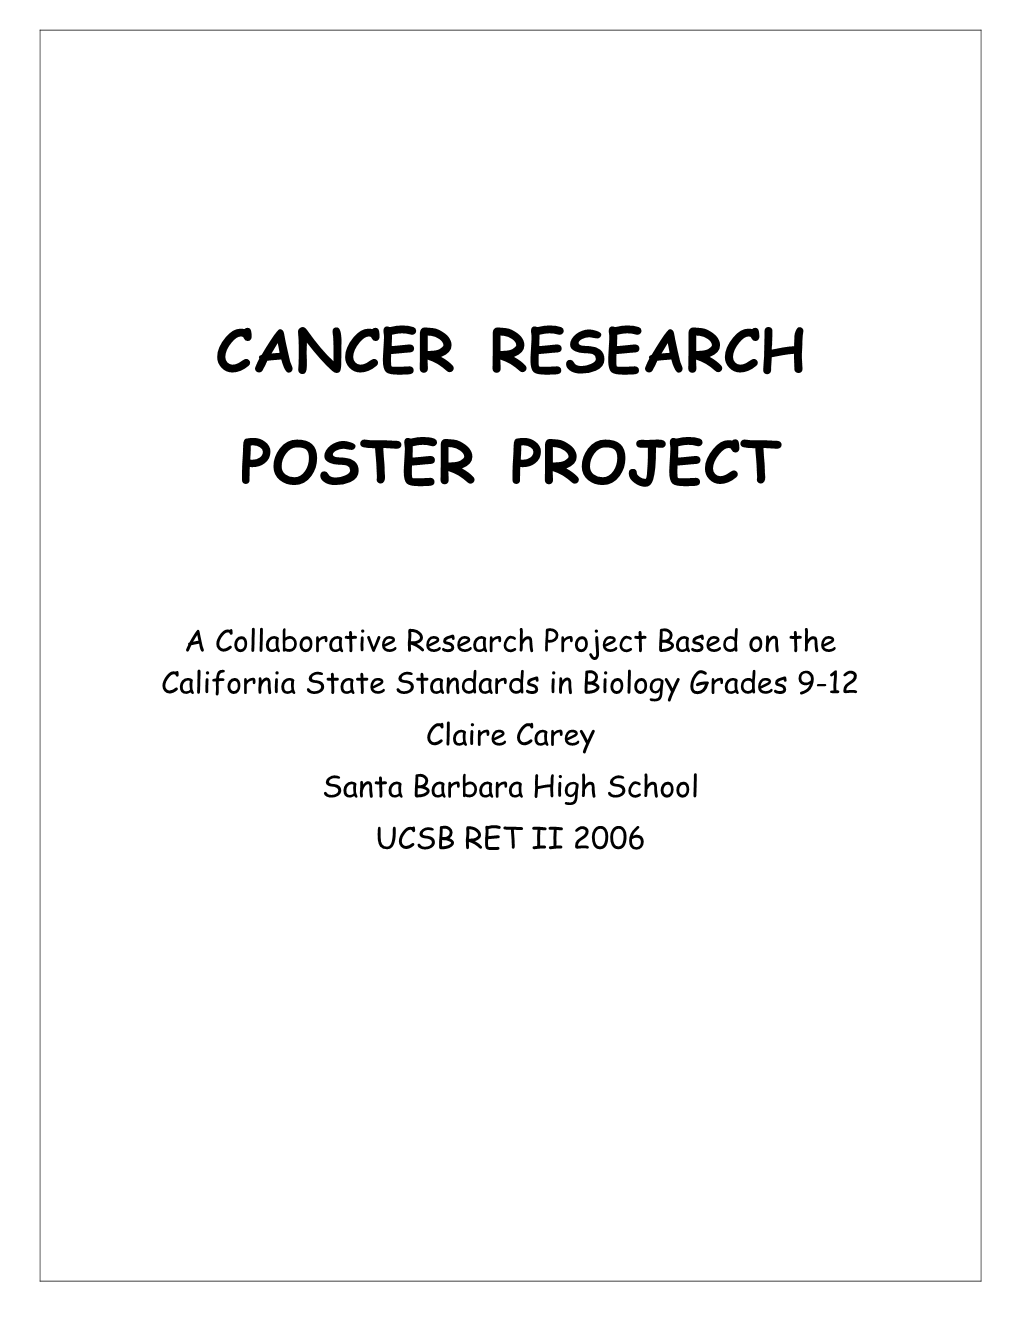 Cancer Research Poster Project